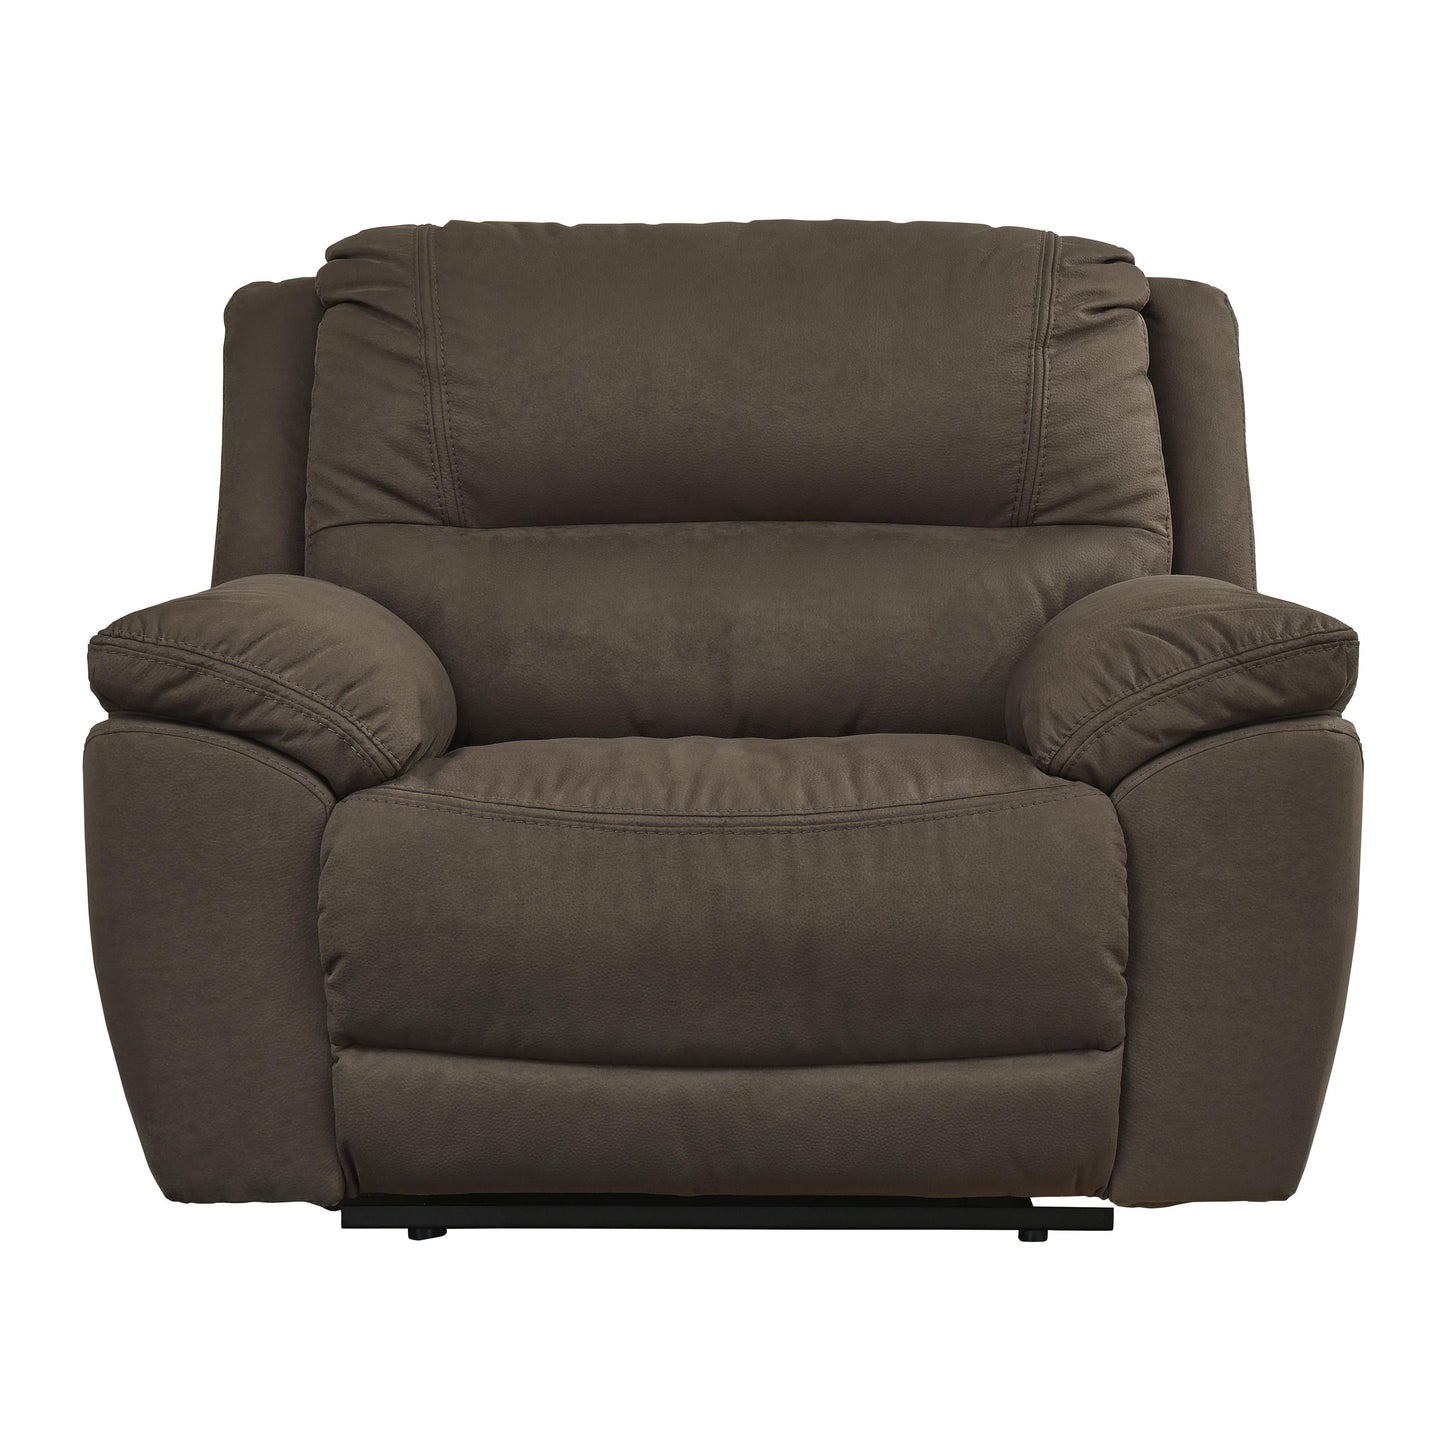 Signature Design by Ashley Next-Gen Gaucho Leather Look Recliner with Wall Recline 5420452 IMAGE 3